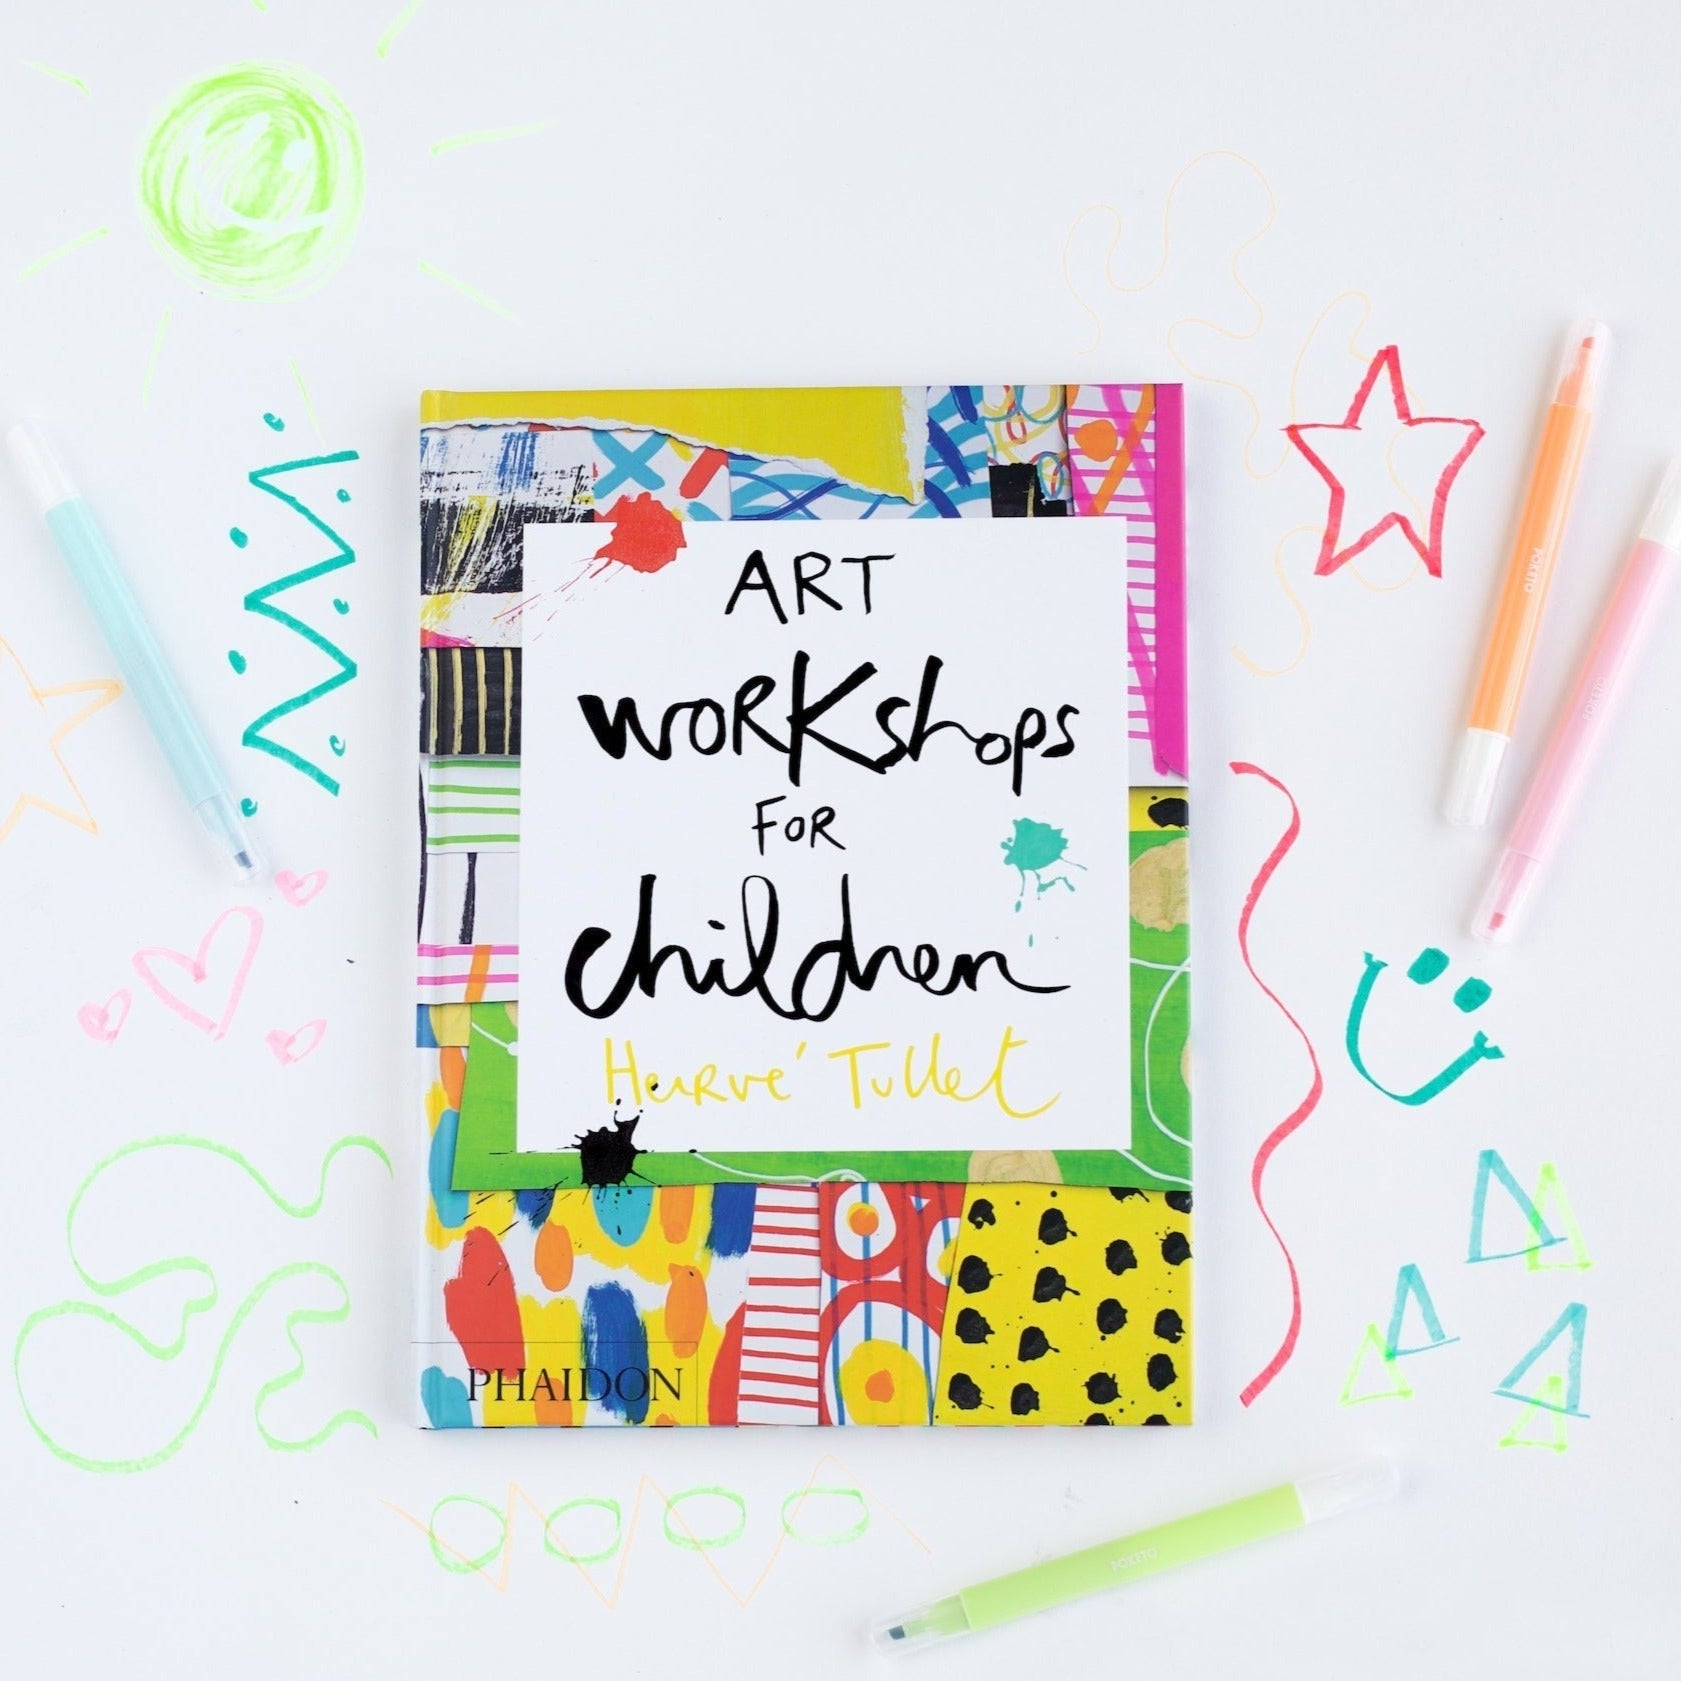 Art Workshops for Children book photographed on white paper with colorful doodles around the book.